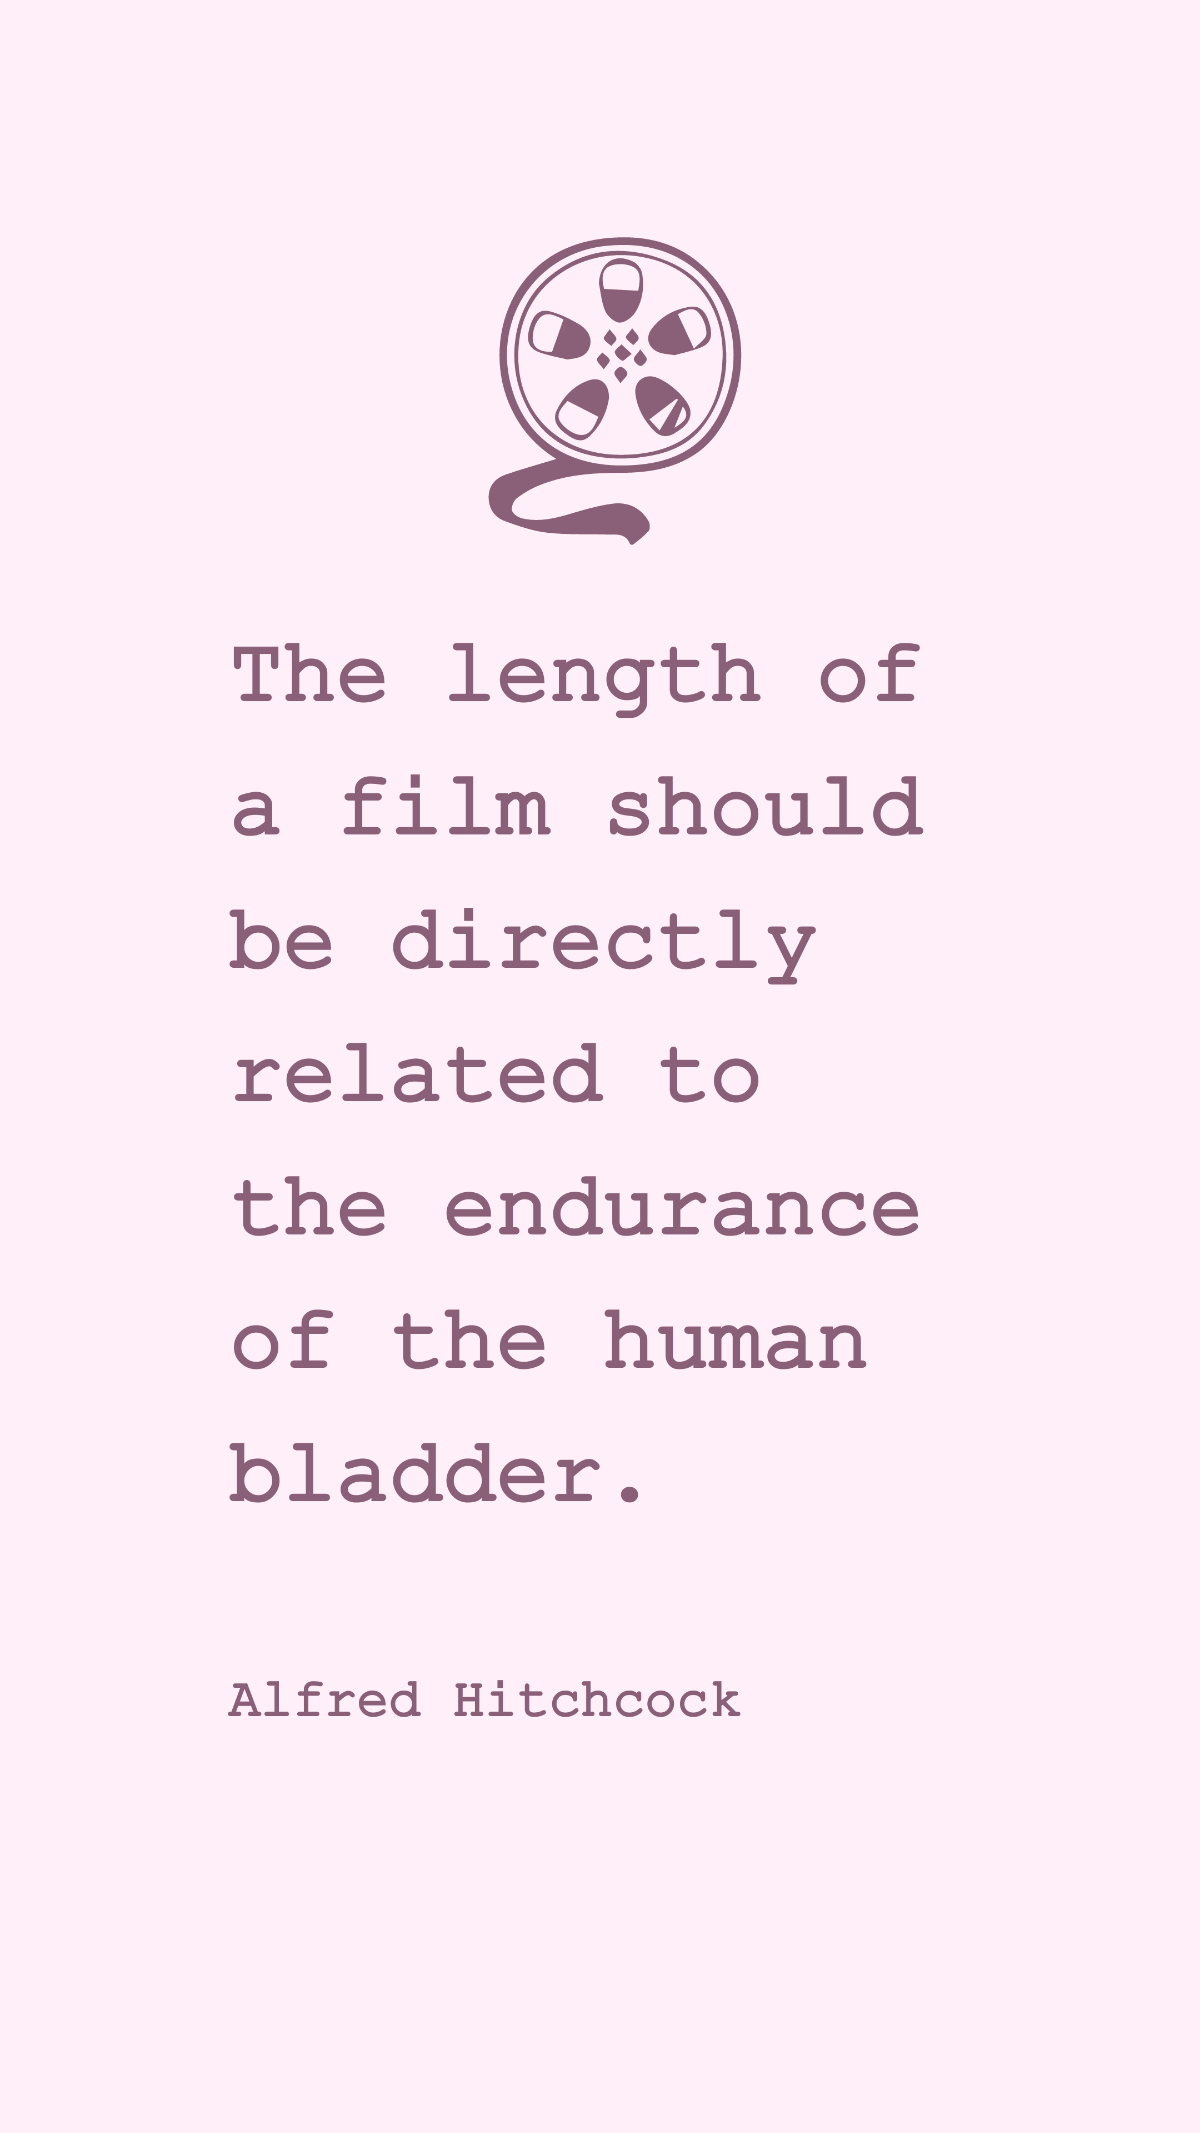 Alfred Hitchcock - The length of a film should be directly related to the endurance of the human bladder.